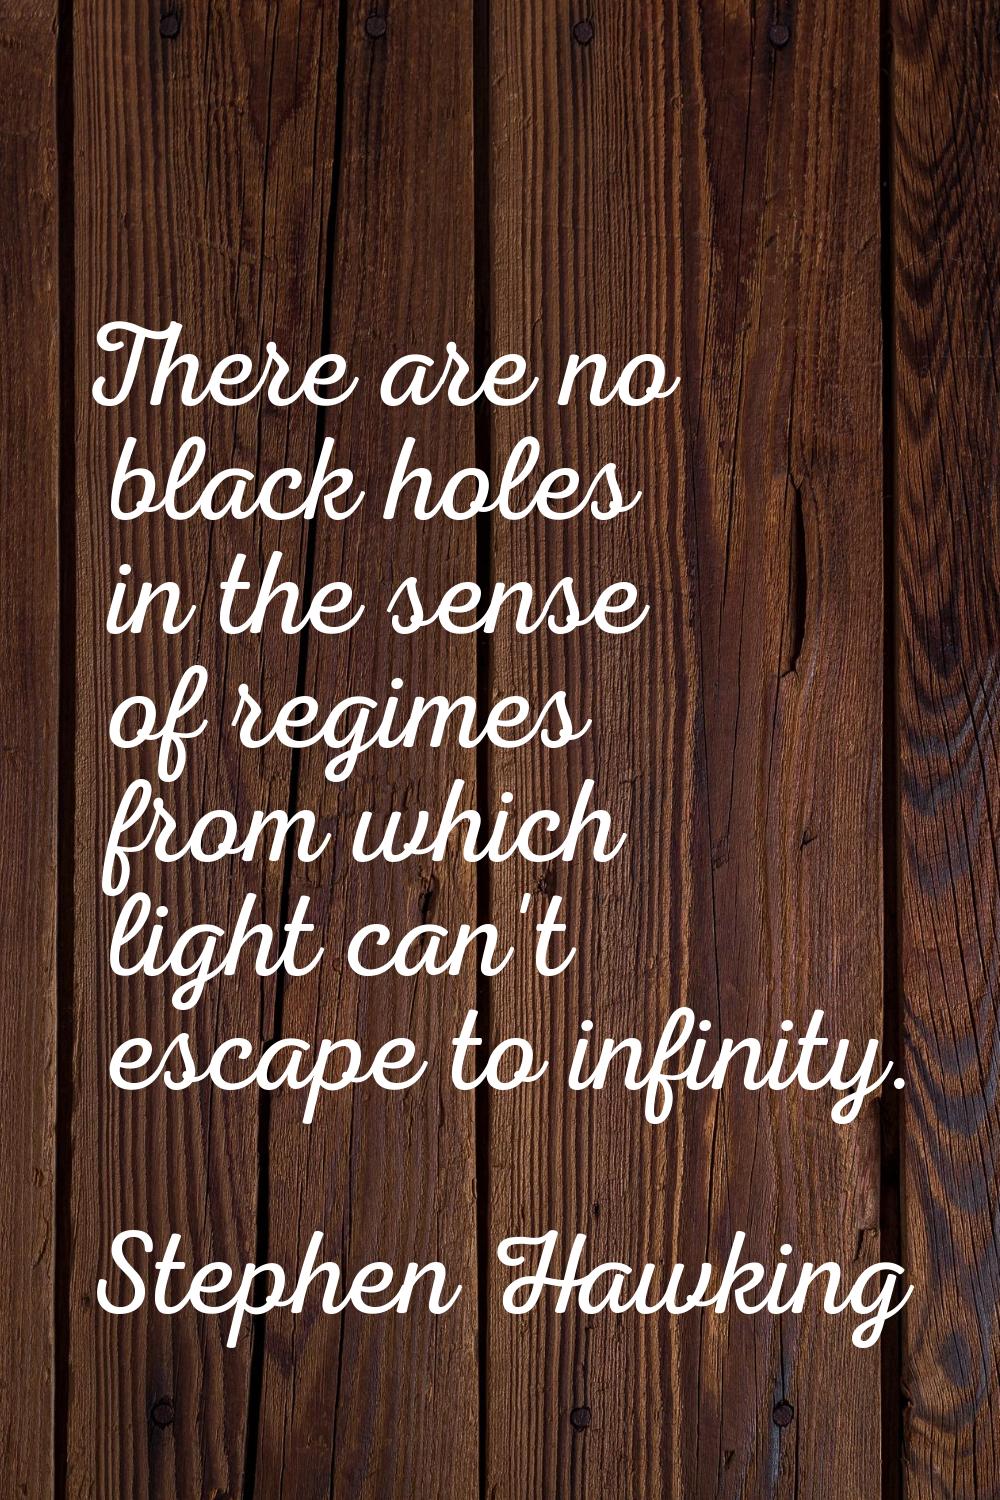 There are no black holes in the sense of regimes from which light can't escape to infinity.